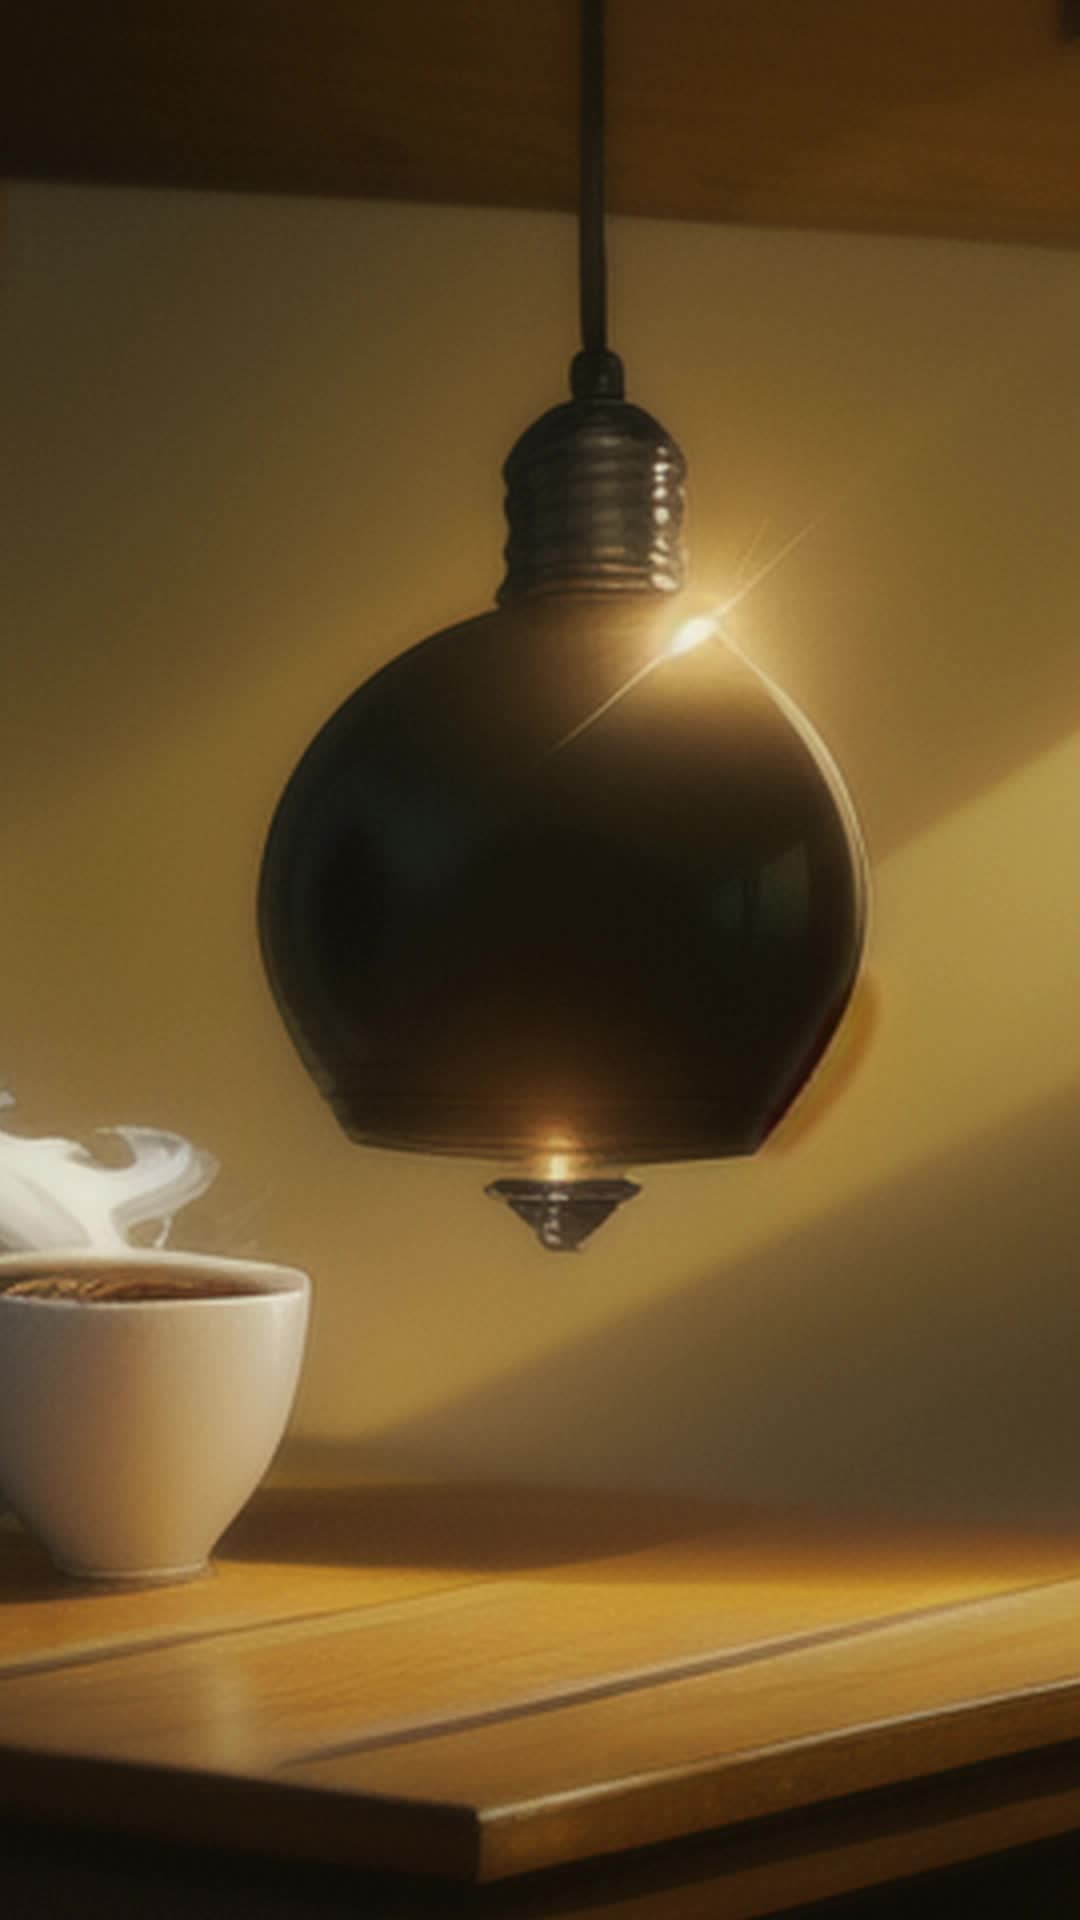 a very dark room where there is a small lightbulb hanging from the ceiling shining on a cup of smoking coffee on the table, the scene is at an above angle